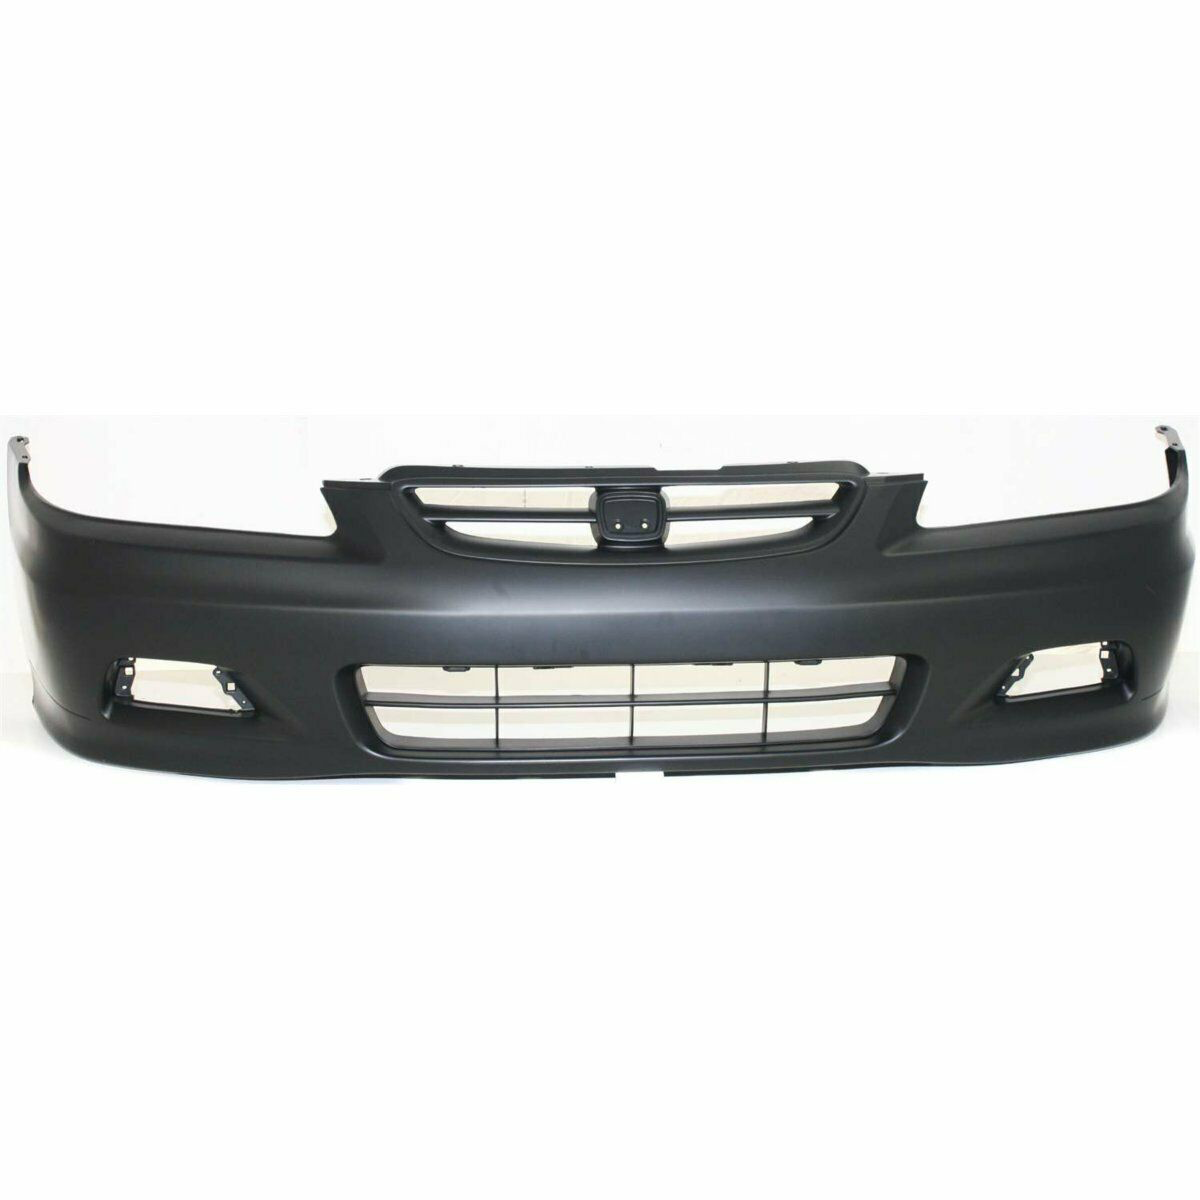 2001-2002 Honda Accord Coupe Front Bumper Painted to Match